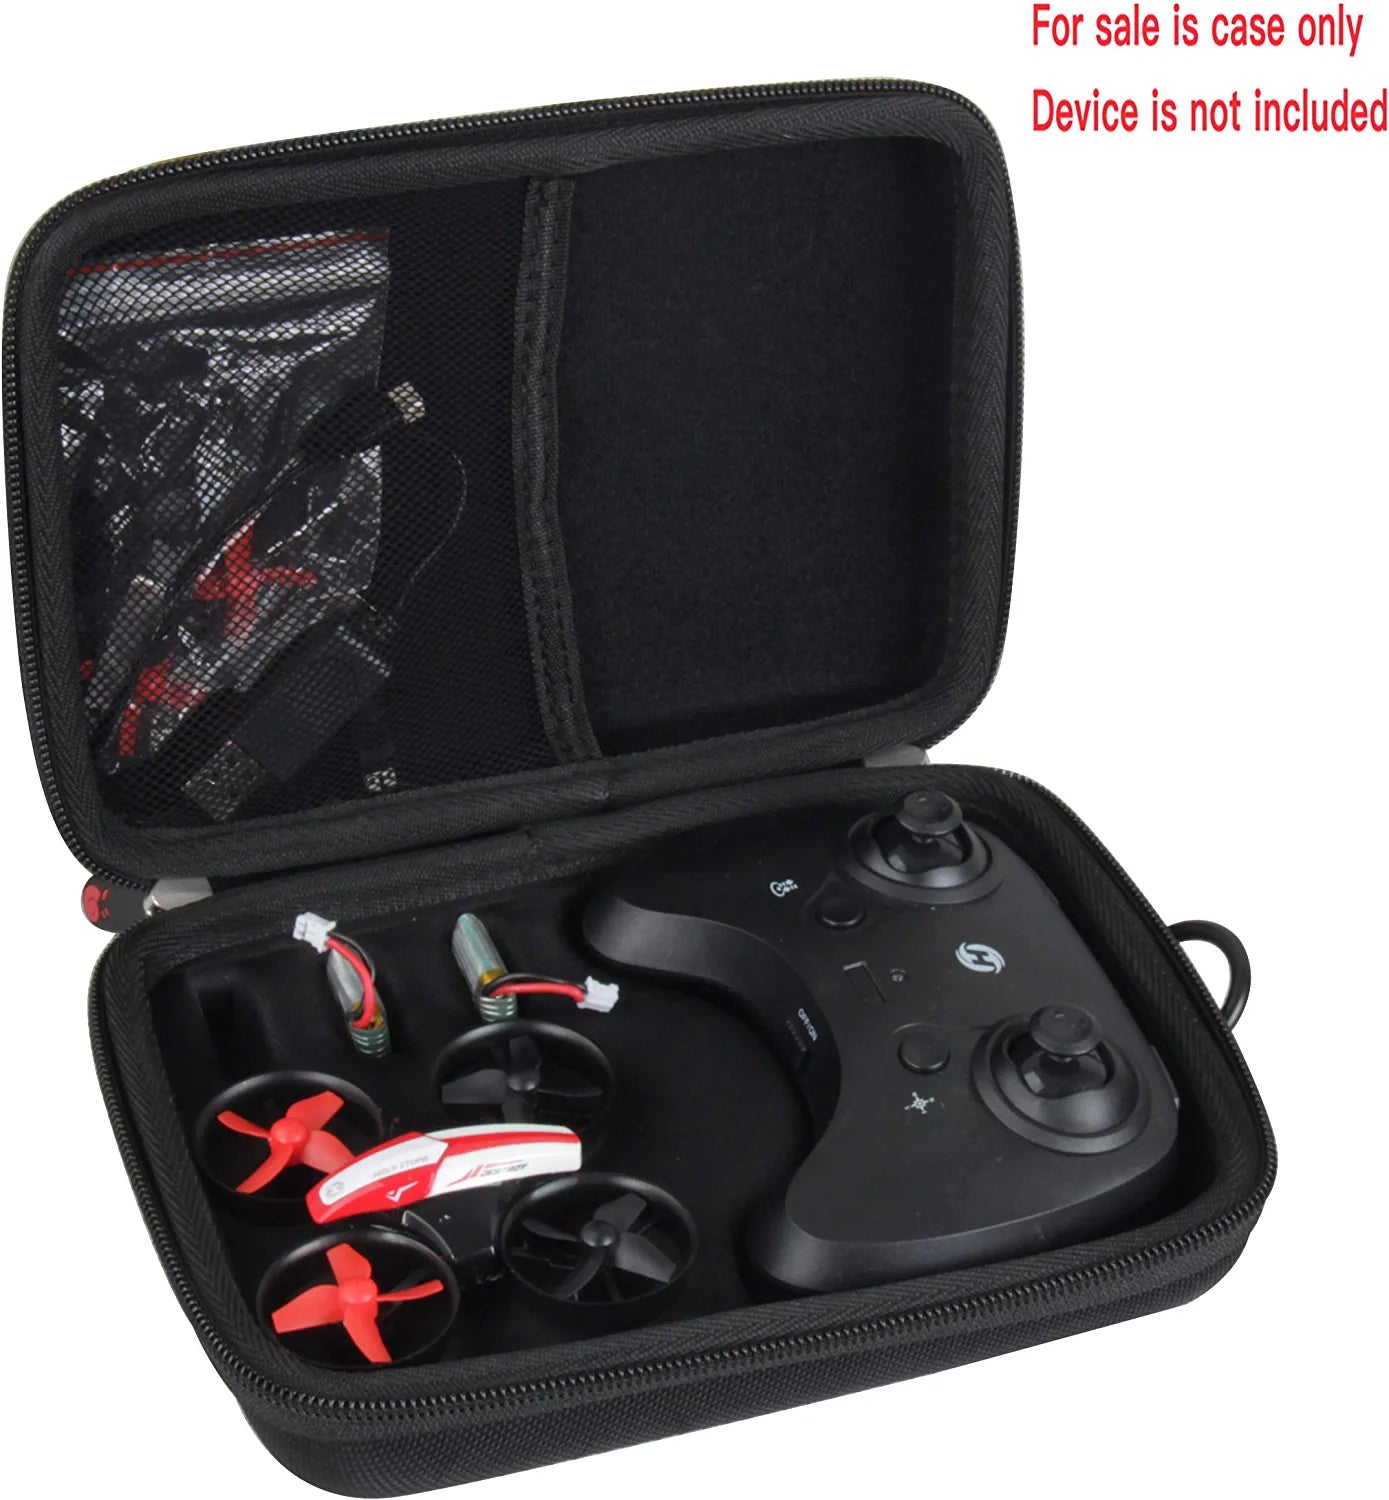 Hard Travel Case for Holy Stone Mini Drone RC Nano Quadcopter Indoor Small Helicopter Plane (Not Include the Drone) (Black)